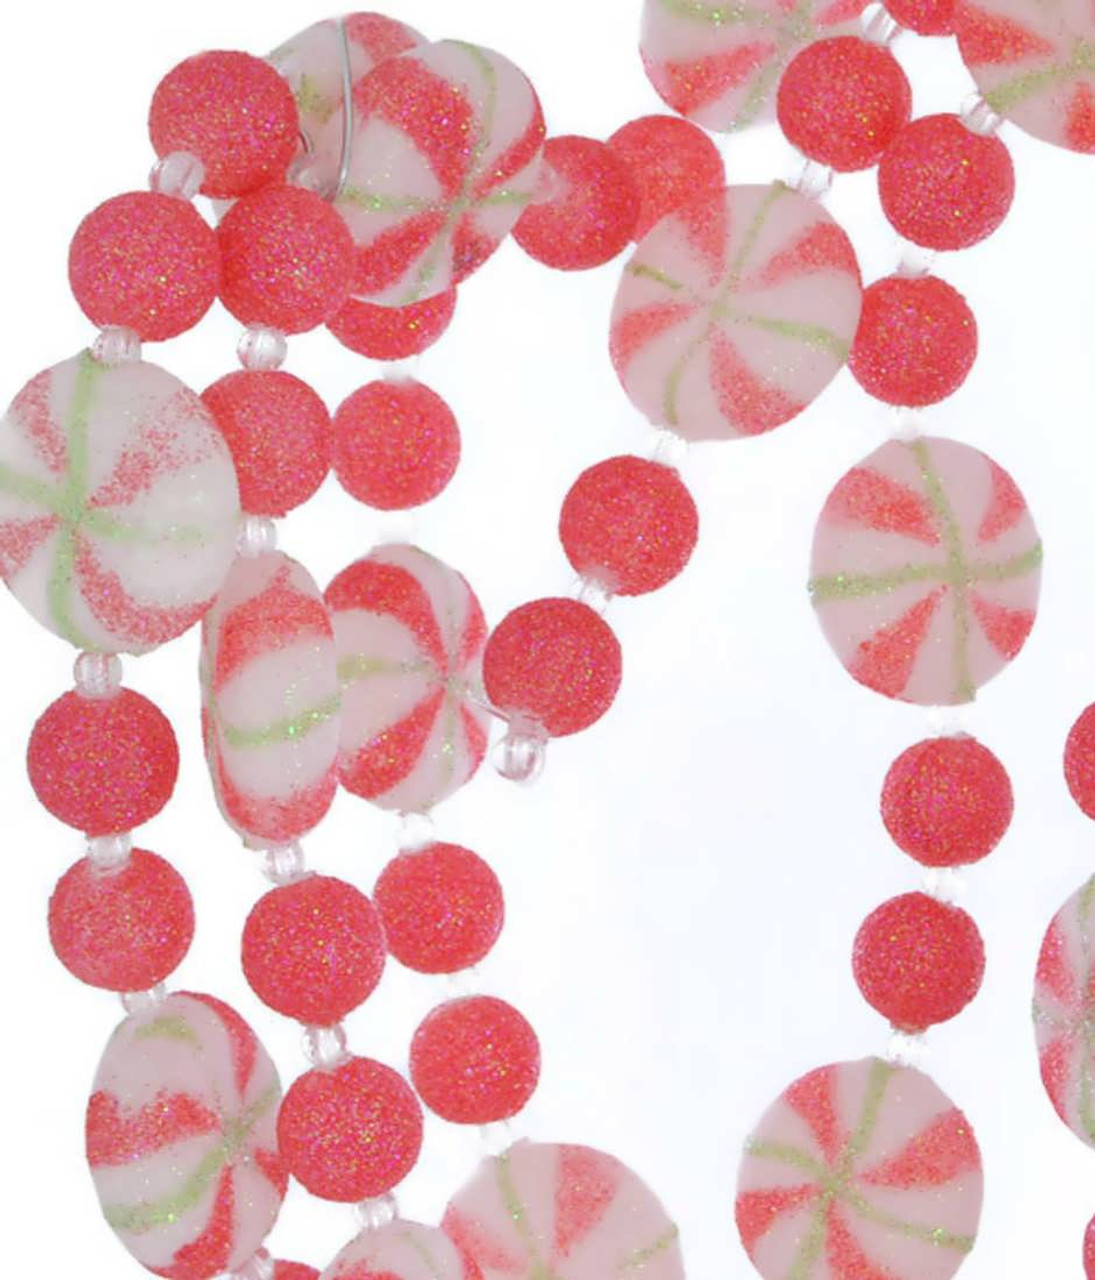 Sweet Beads Candy Beads and String Kit - All City Candy